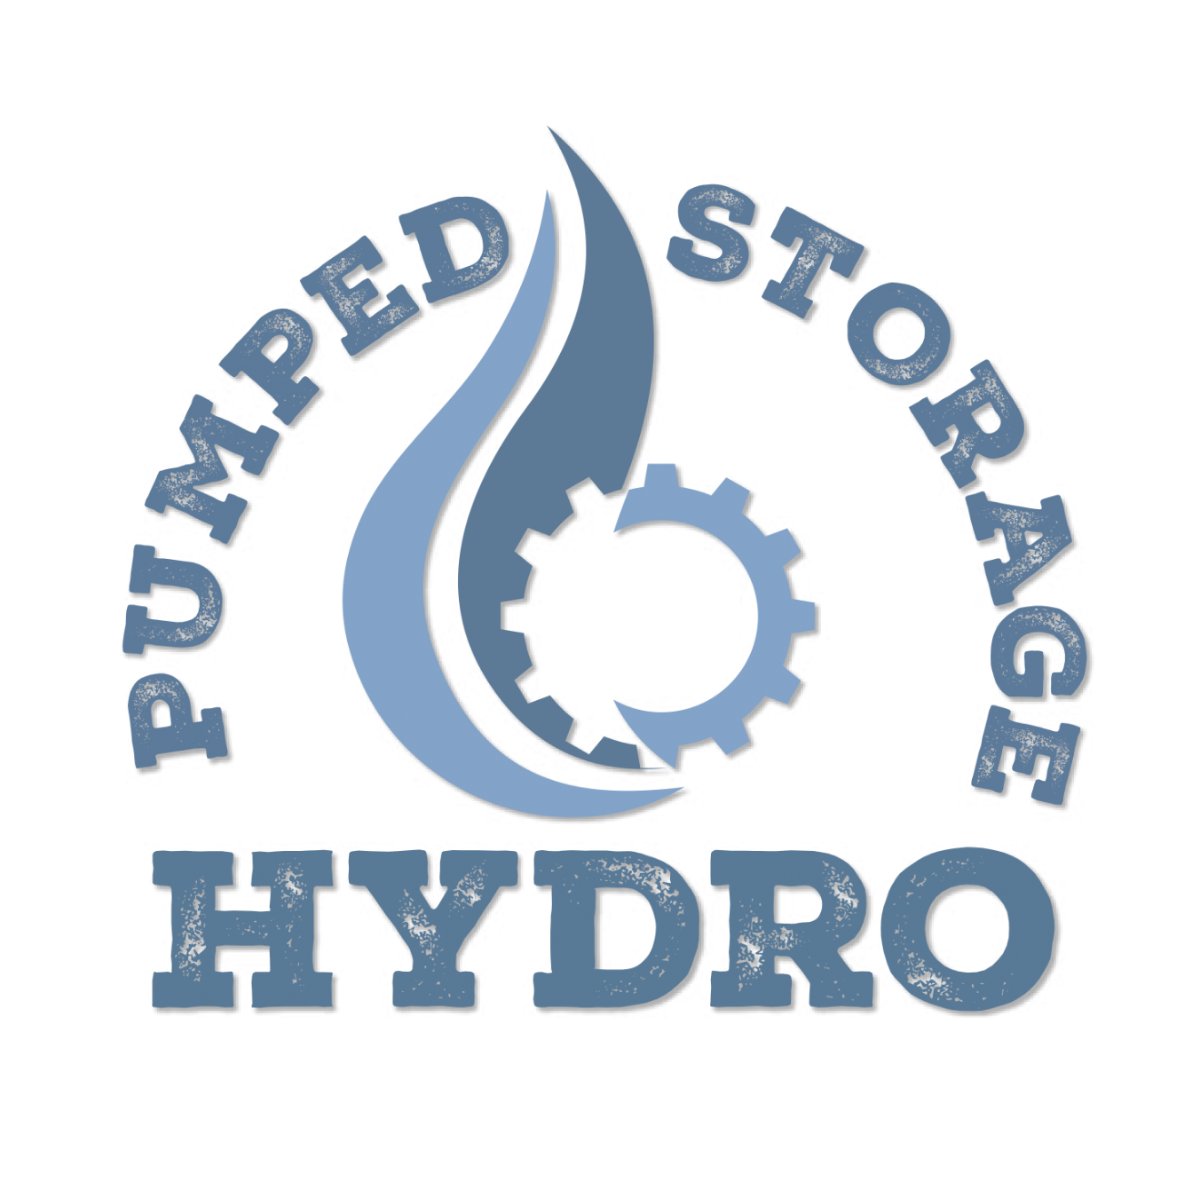 Pumped storage hydro is considered to be the most developed form of grid energy storage. It is crucial to the further development of renewable energy.